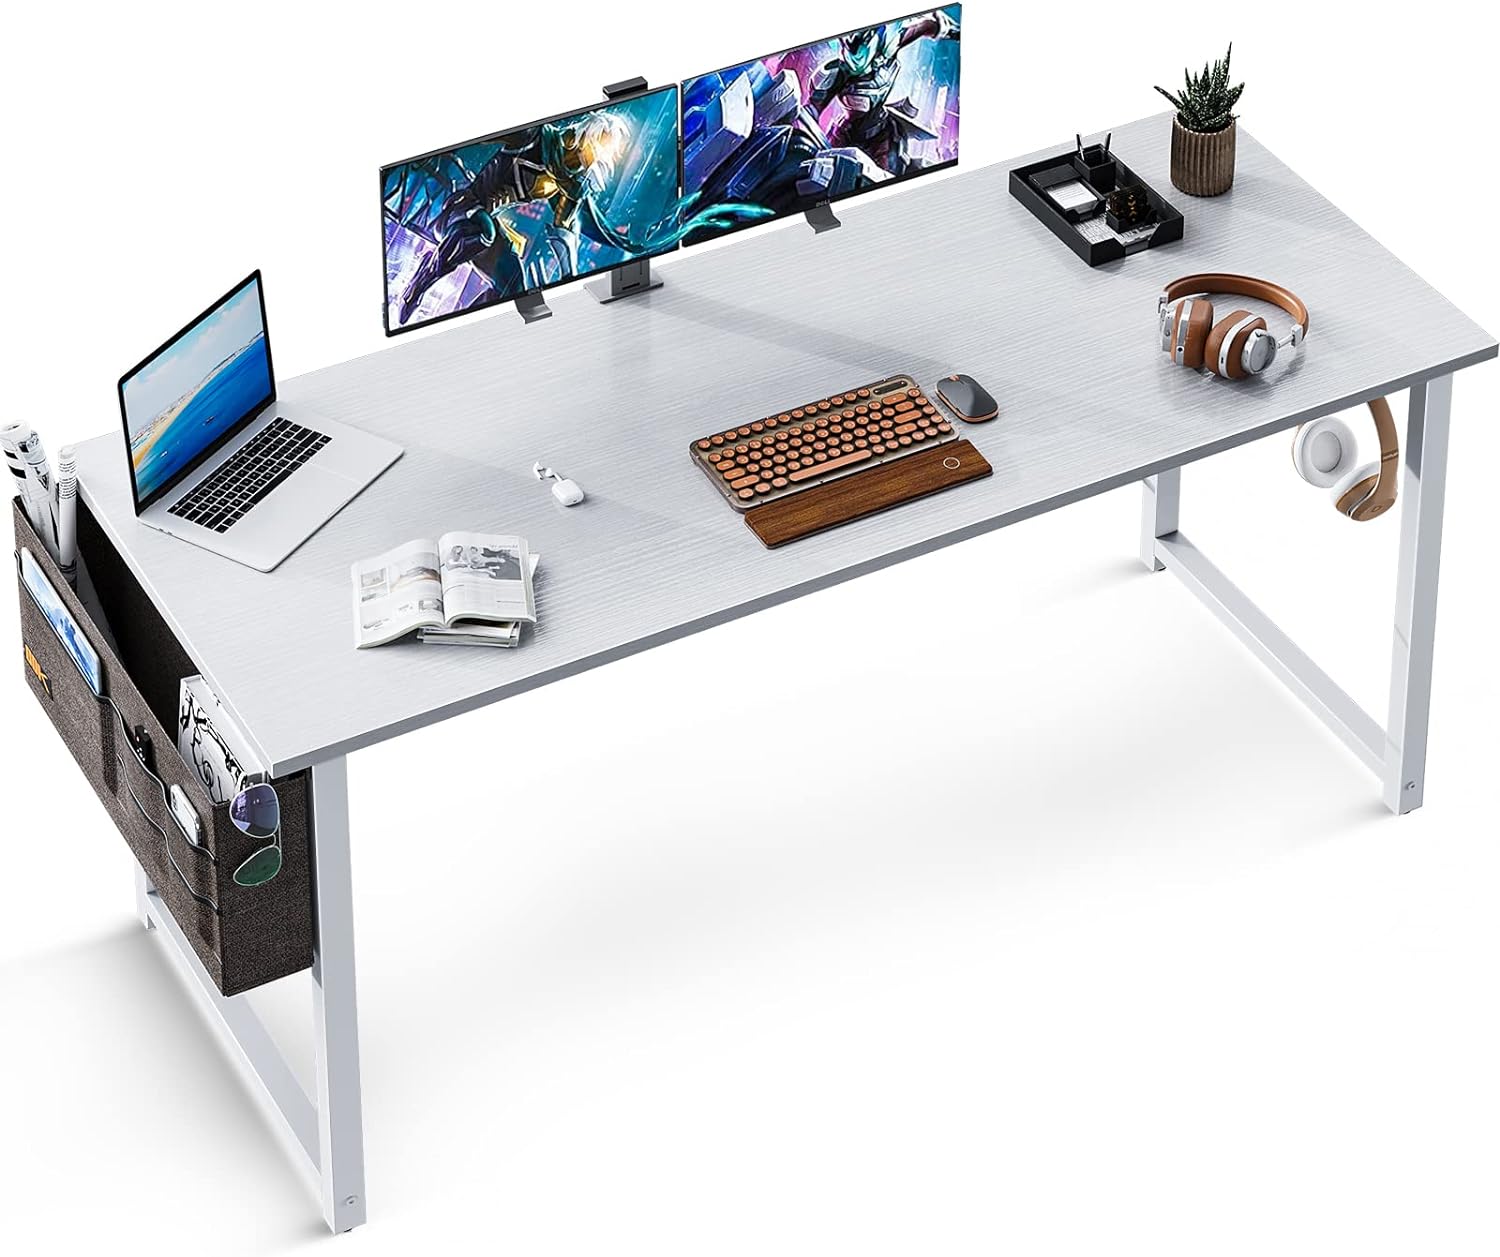 I recently purchased the ODK 63-inch Super Large Computer Writing Desk for my home office, and I am extremely pleased with my purchase. This desk offers a perfect blend of aesthetics, functionality, and convenience, making it an ideal choice for both gaming and professional work.Assembly:The assembly process was a breeze, taking me approximately 20 to 30 minutes to complete. The instructions provided were crystal clear, with parts well-marked using both letters and numbers. This made it easy to 